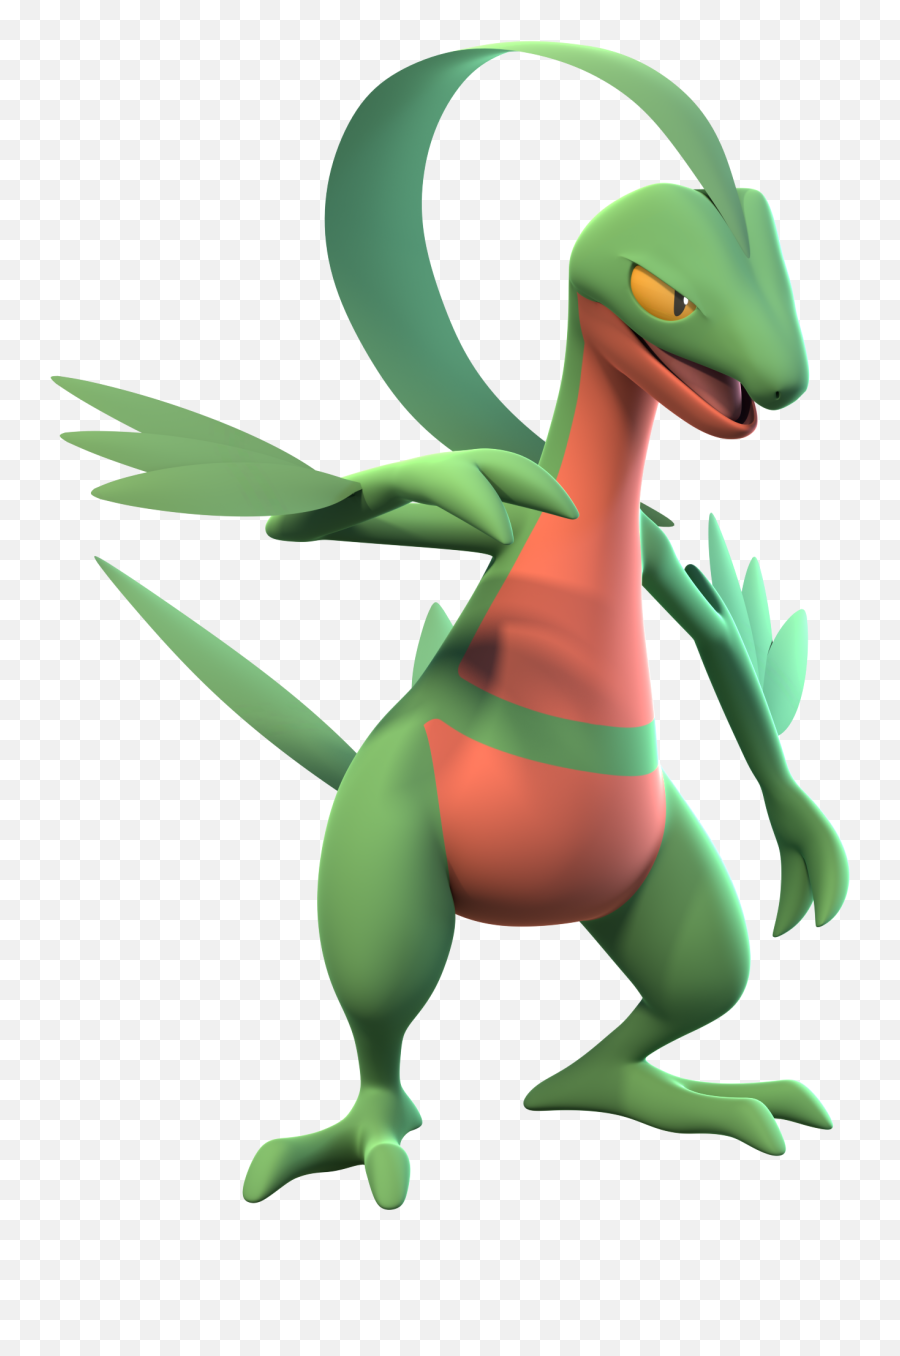 Djtheds 3d Dumping Grounds - Pokemon 3d Renders Png Emoji,Pokemon Mystery Dungeon Grovyle Emotions